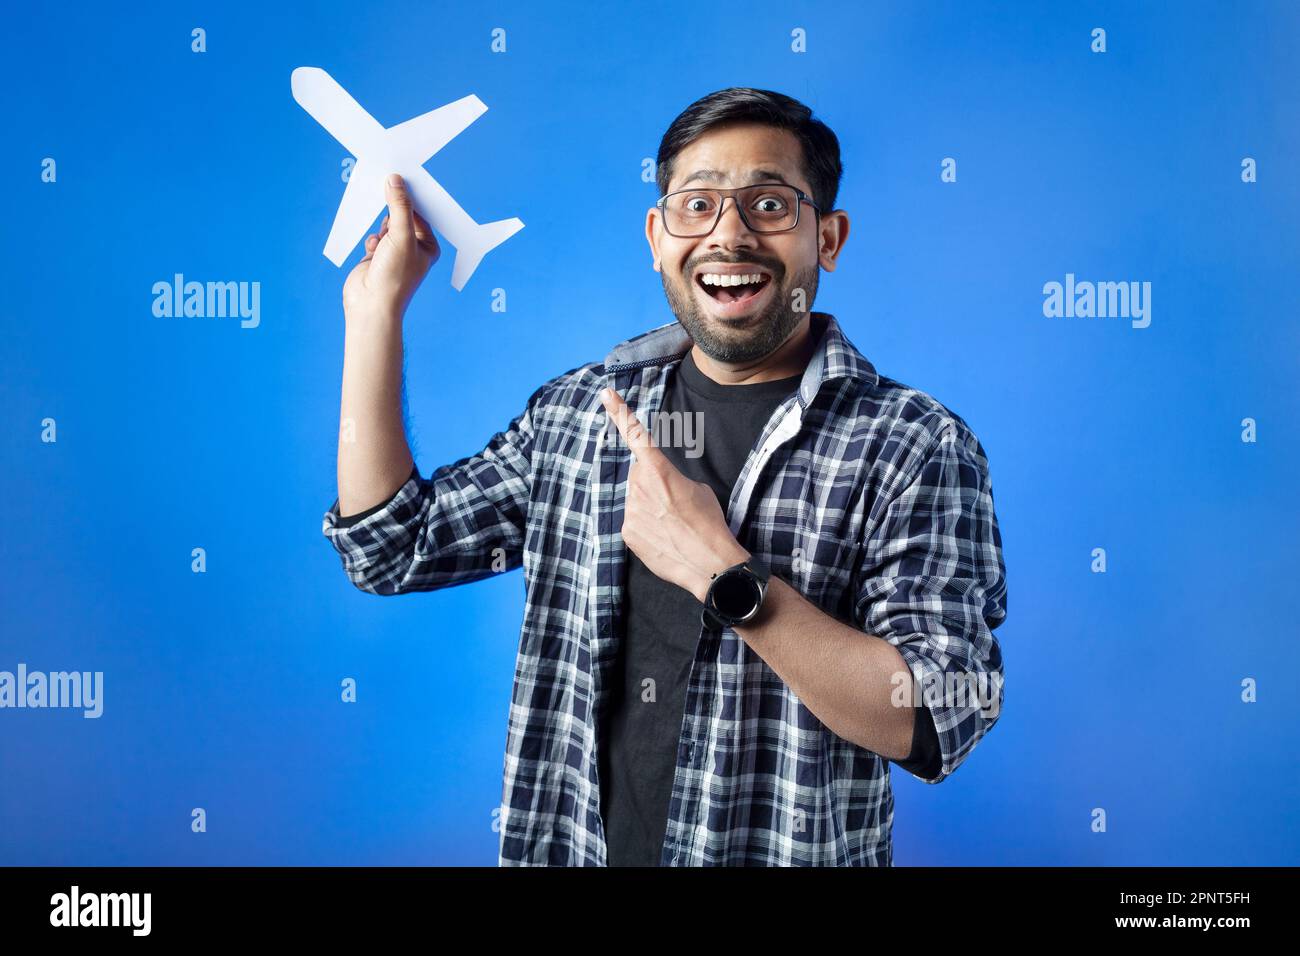 Toothy smile, travel destination, journey. One university student clutching paper cut airplane and pointing. Stock Photo